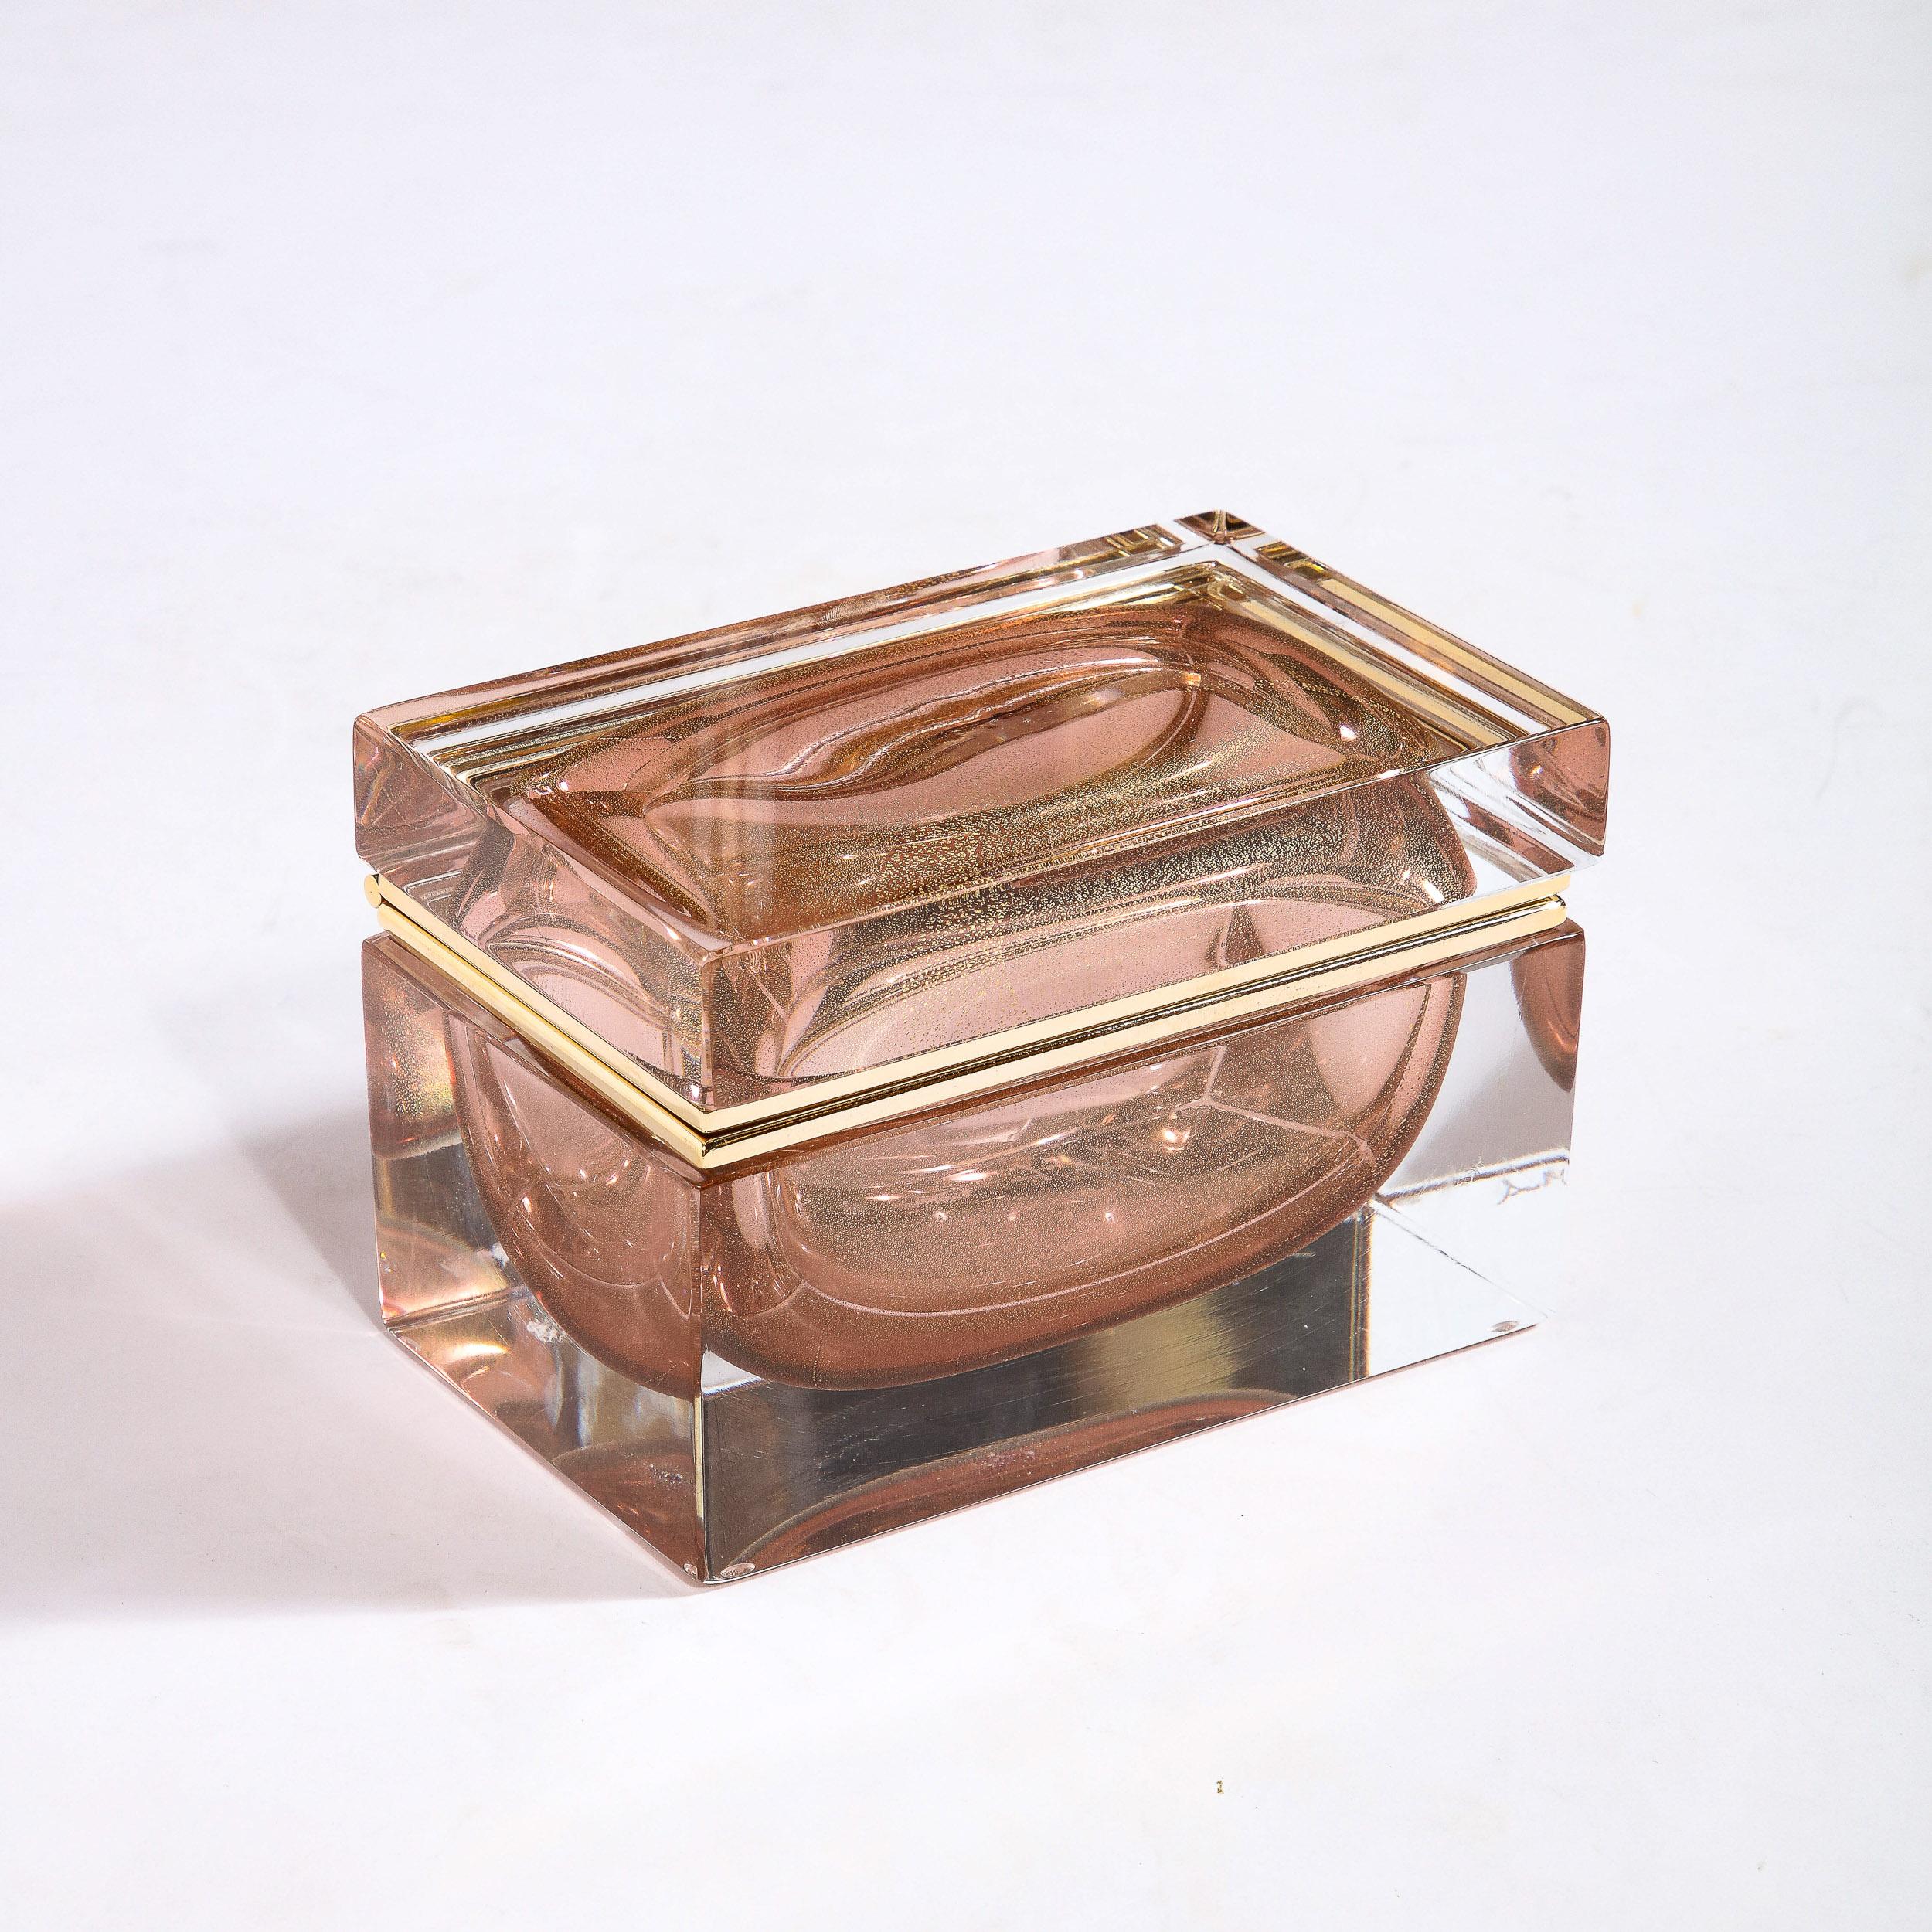 This beautiful modernist decorative box was realized in Murano, Italy- the island off the coast of Venice renowned for centuries for its superlative glass production. It features a volumetric rectangular body with a translucent Murano glass exterior